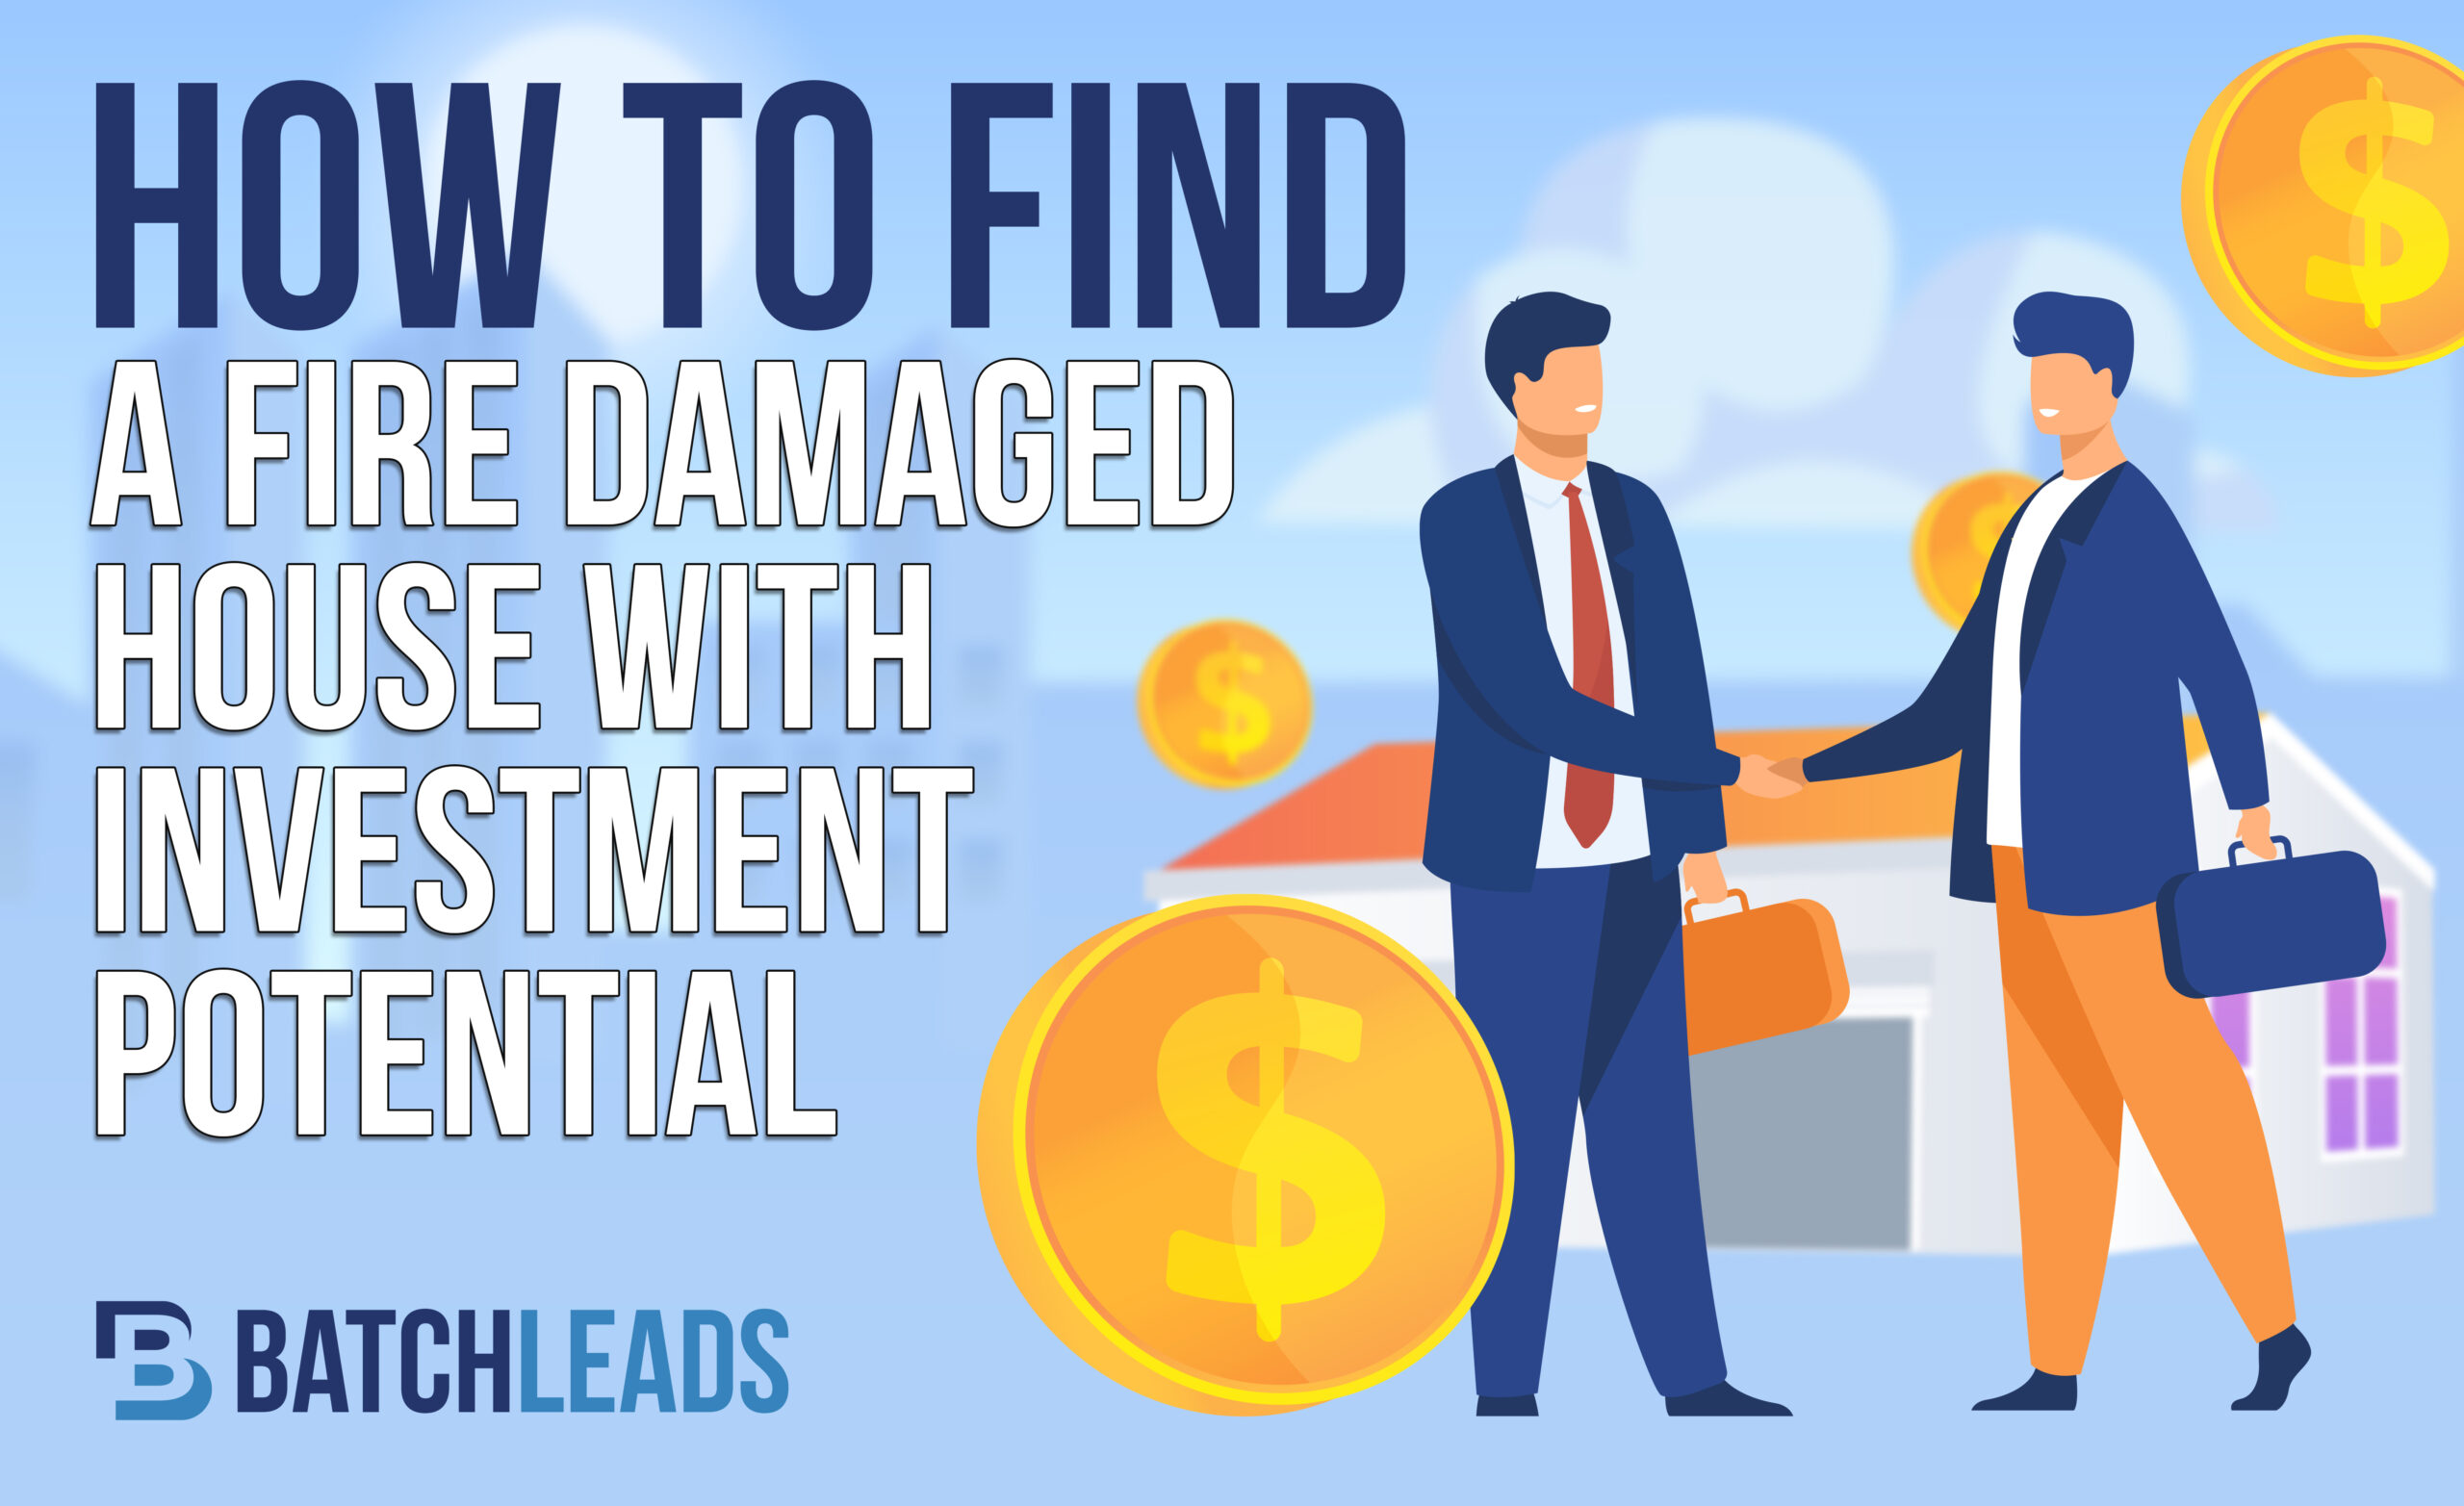 How to Find a Fire Damaged House with Investment Potential